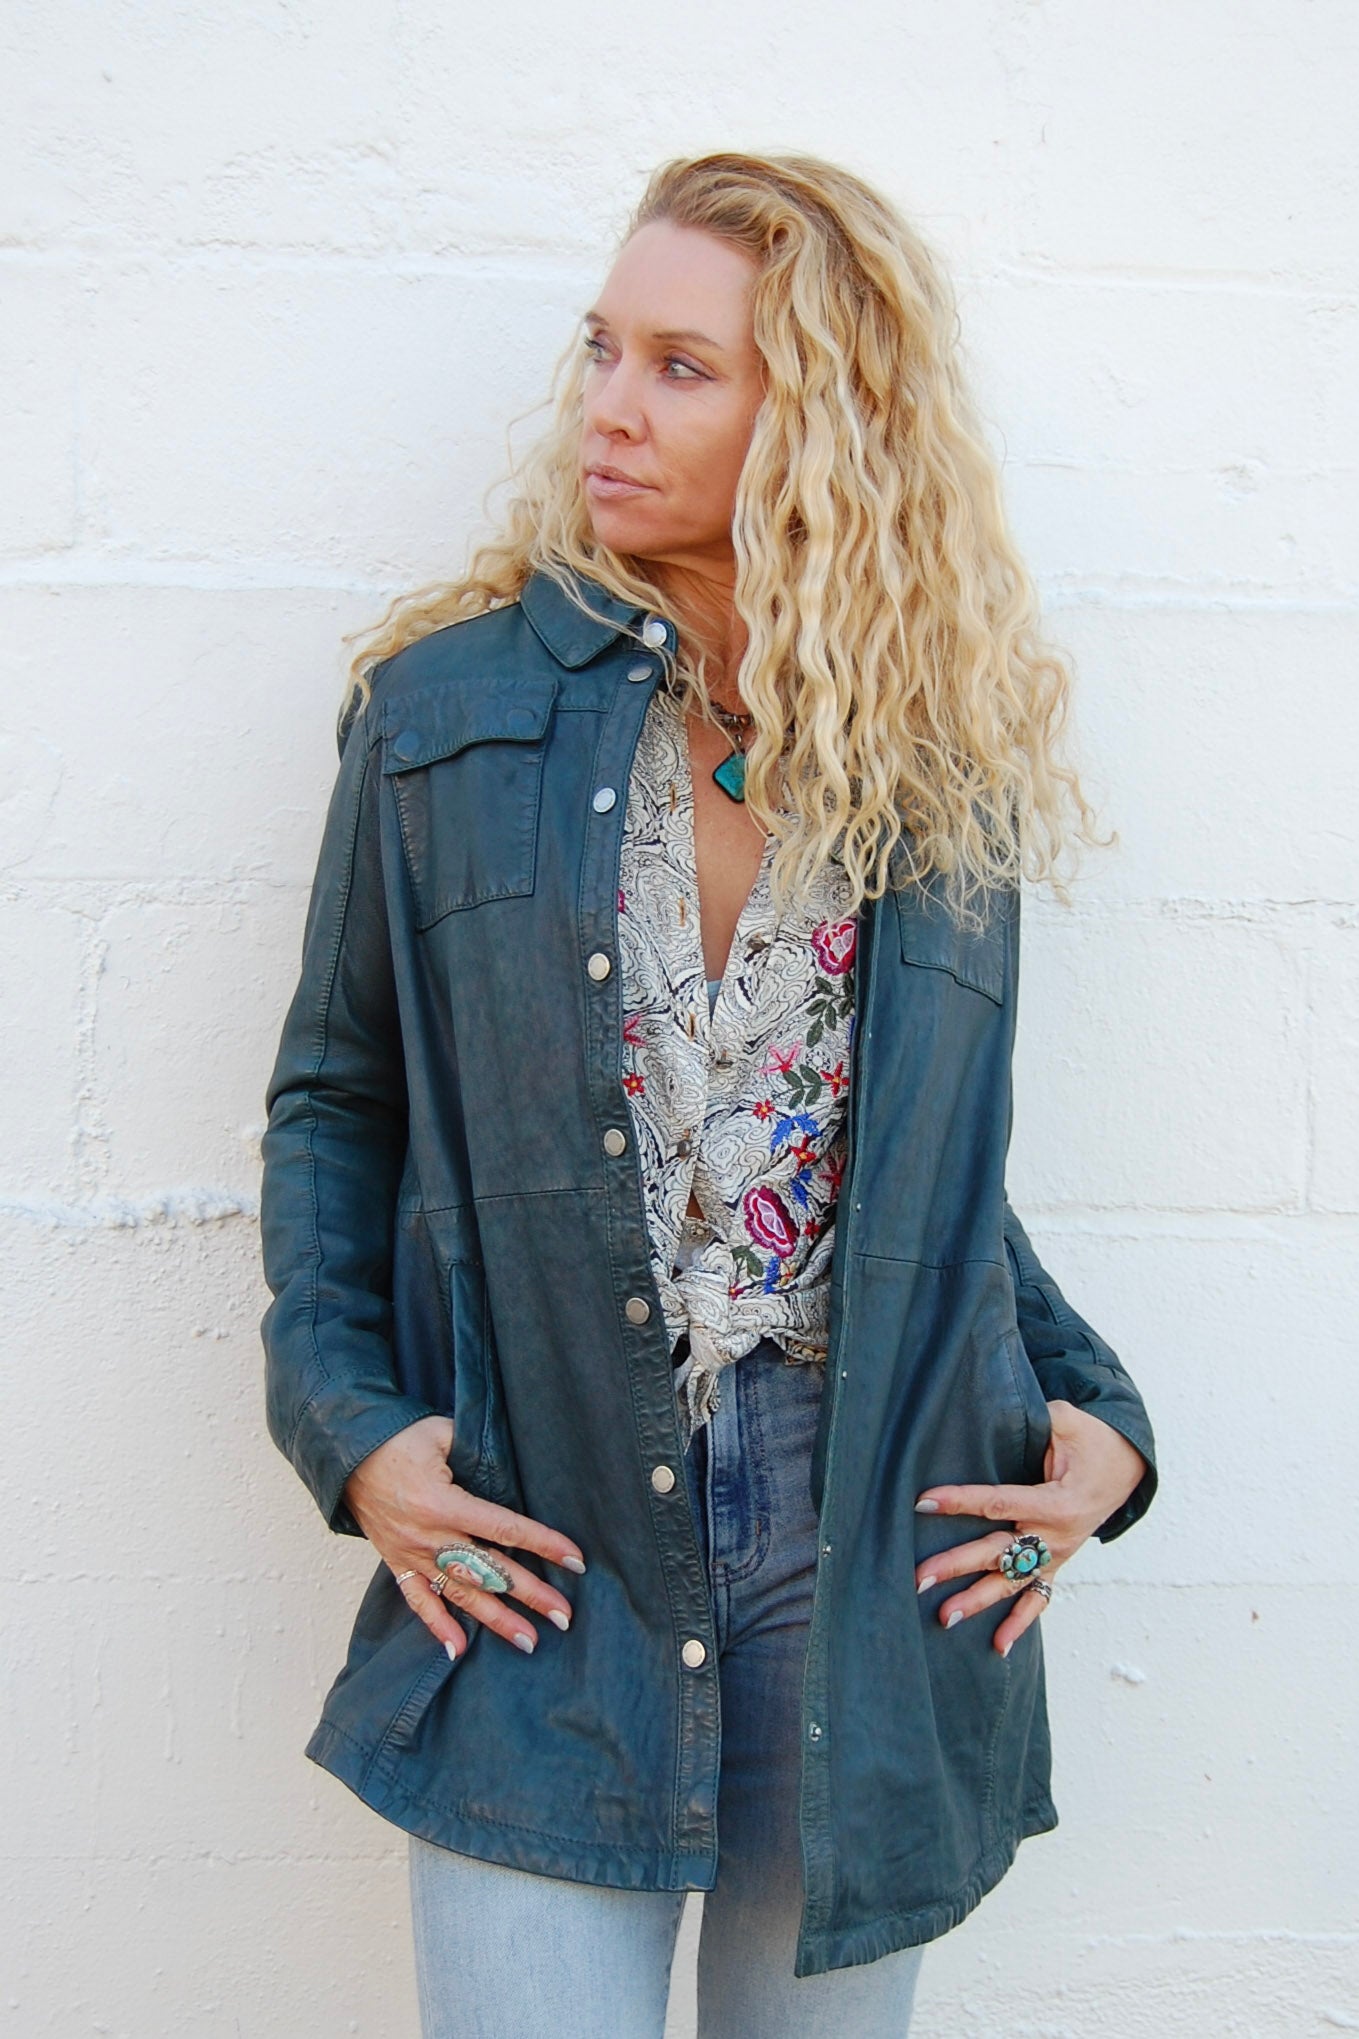 Load image into Gallery viewer, Mahi RF Jacket in Teal - SpiritedBoutiques Boho Hippie Boutique Style Jacket, Mauritius
